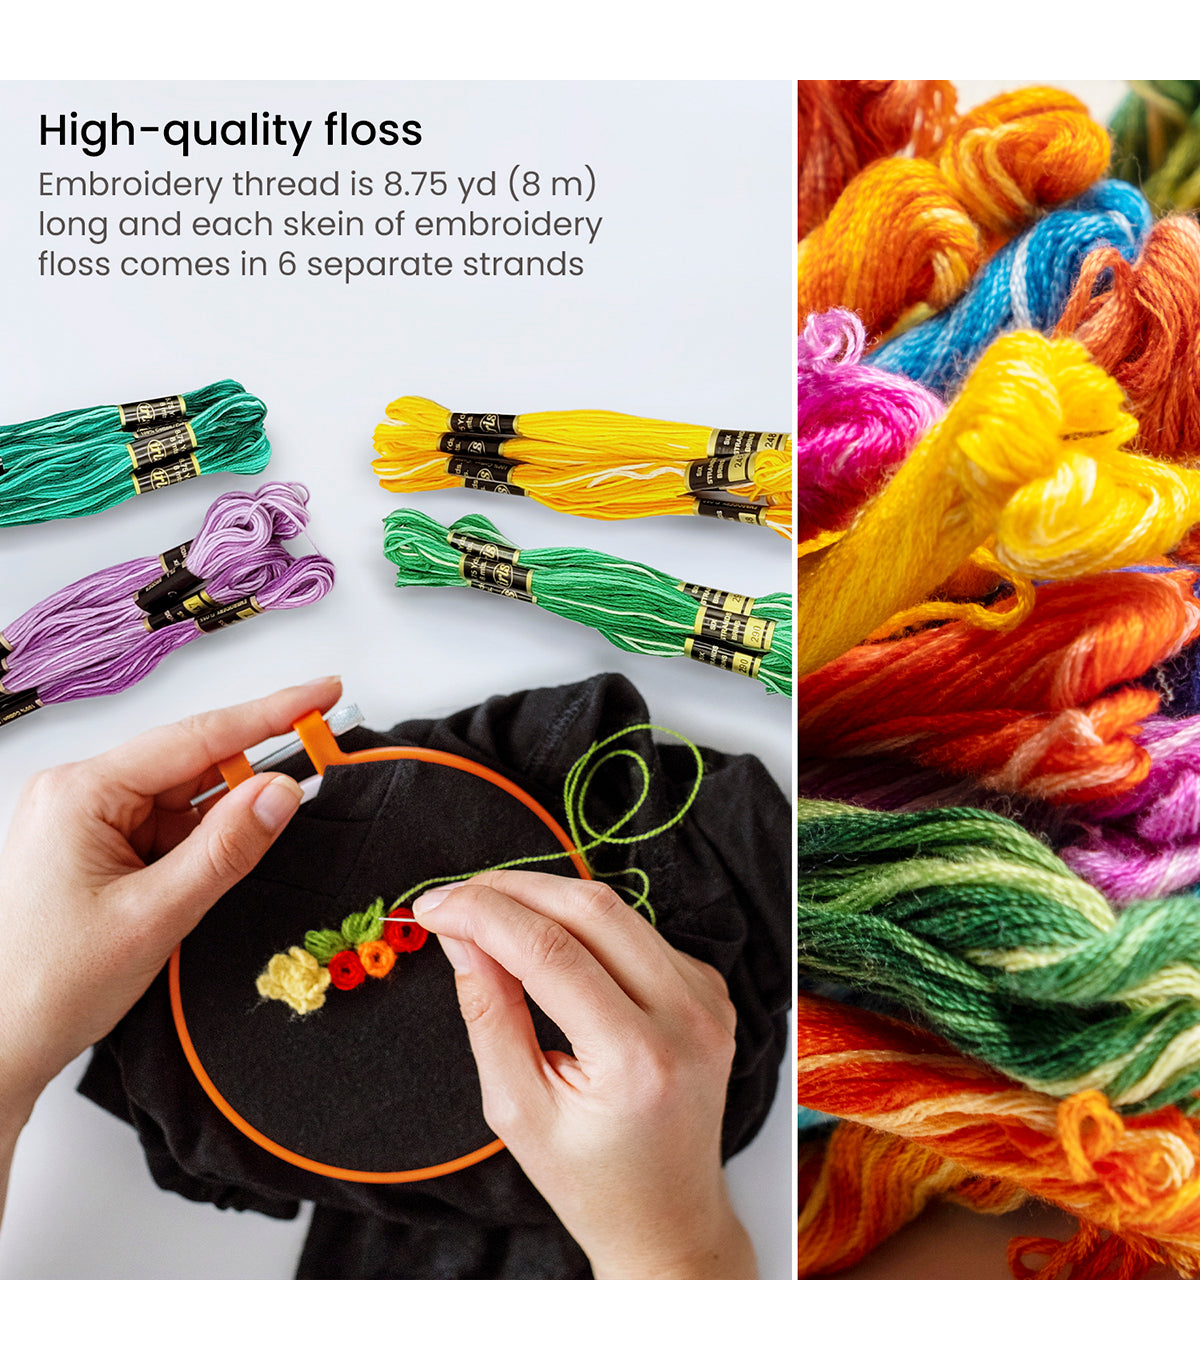 40 Variegated Colors Set Gassed Mercerized Egyptian Cotton Embroidery Floss  8 Meters Skein Mouline Variation Cross Stitch Thread